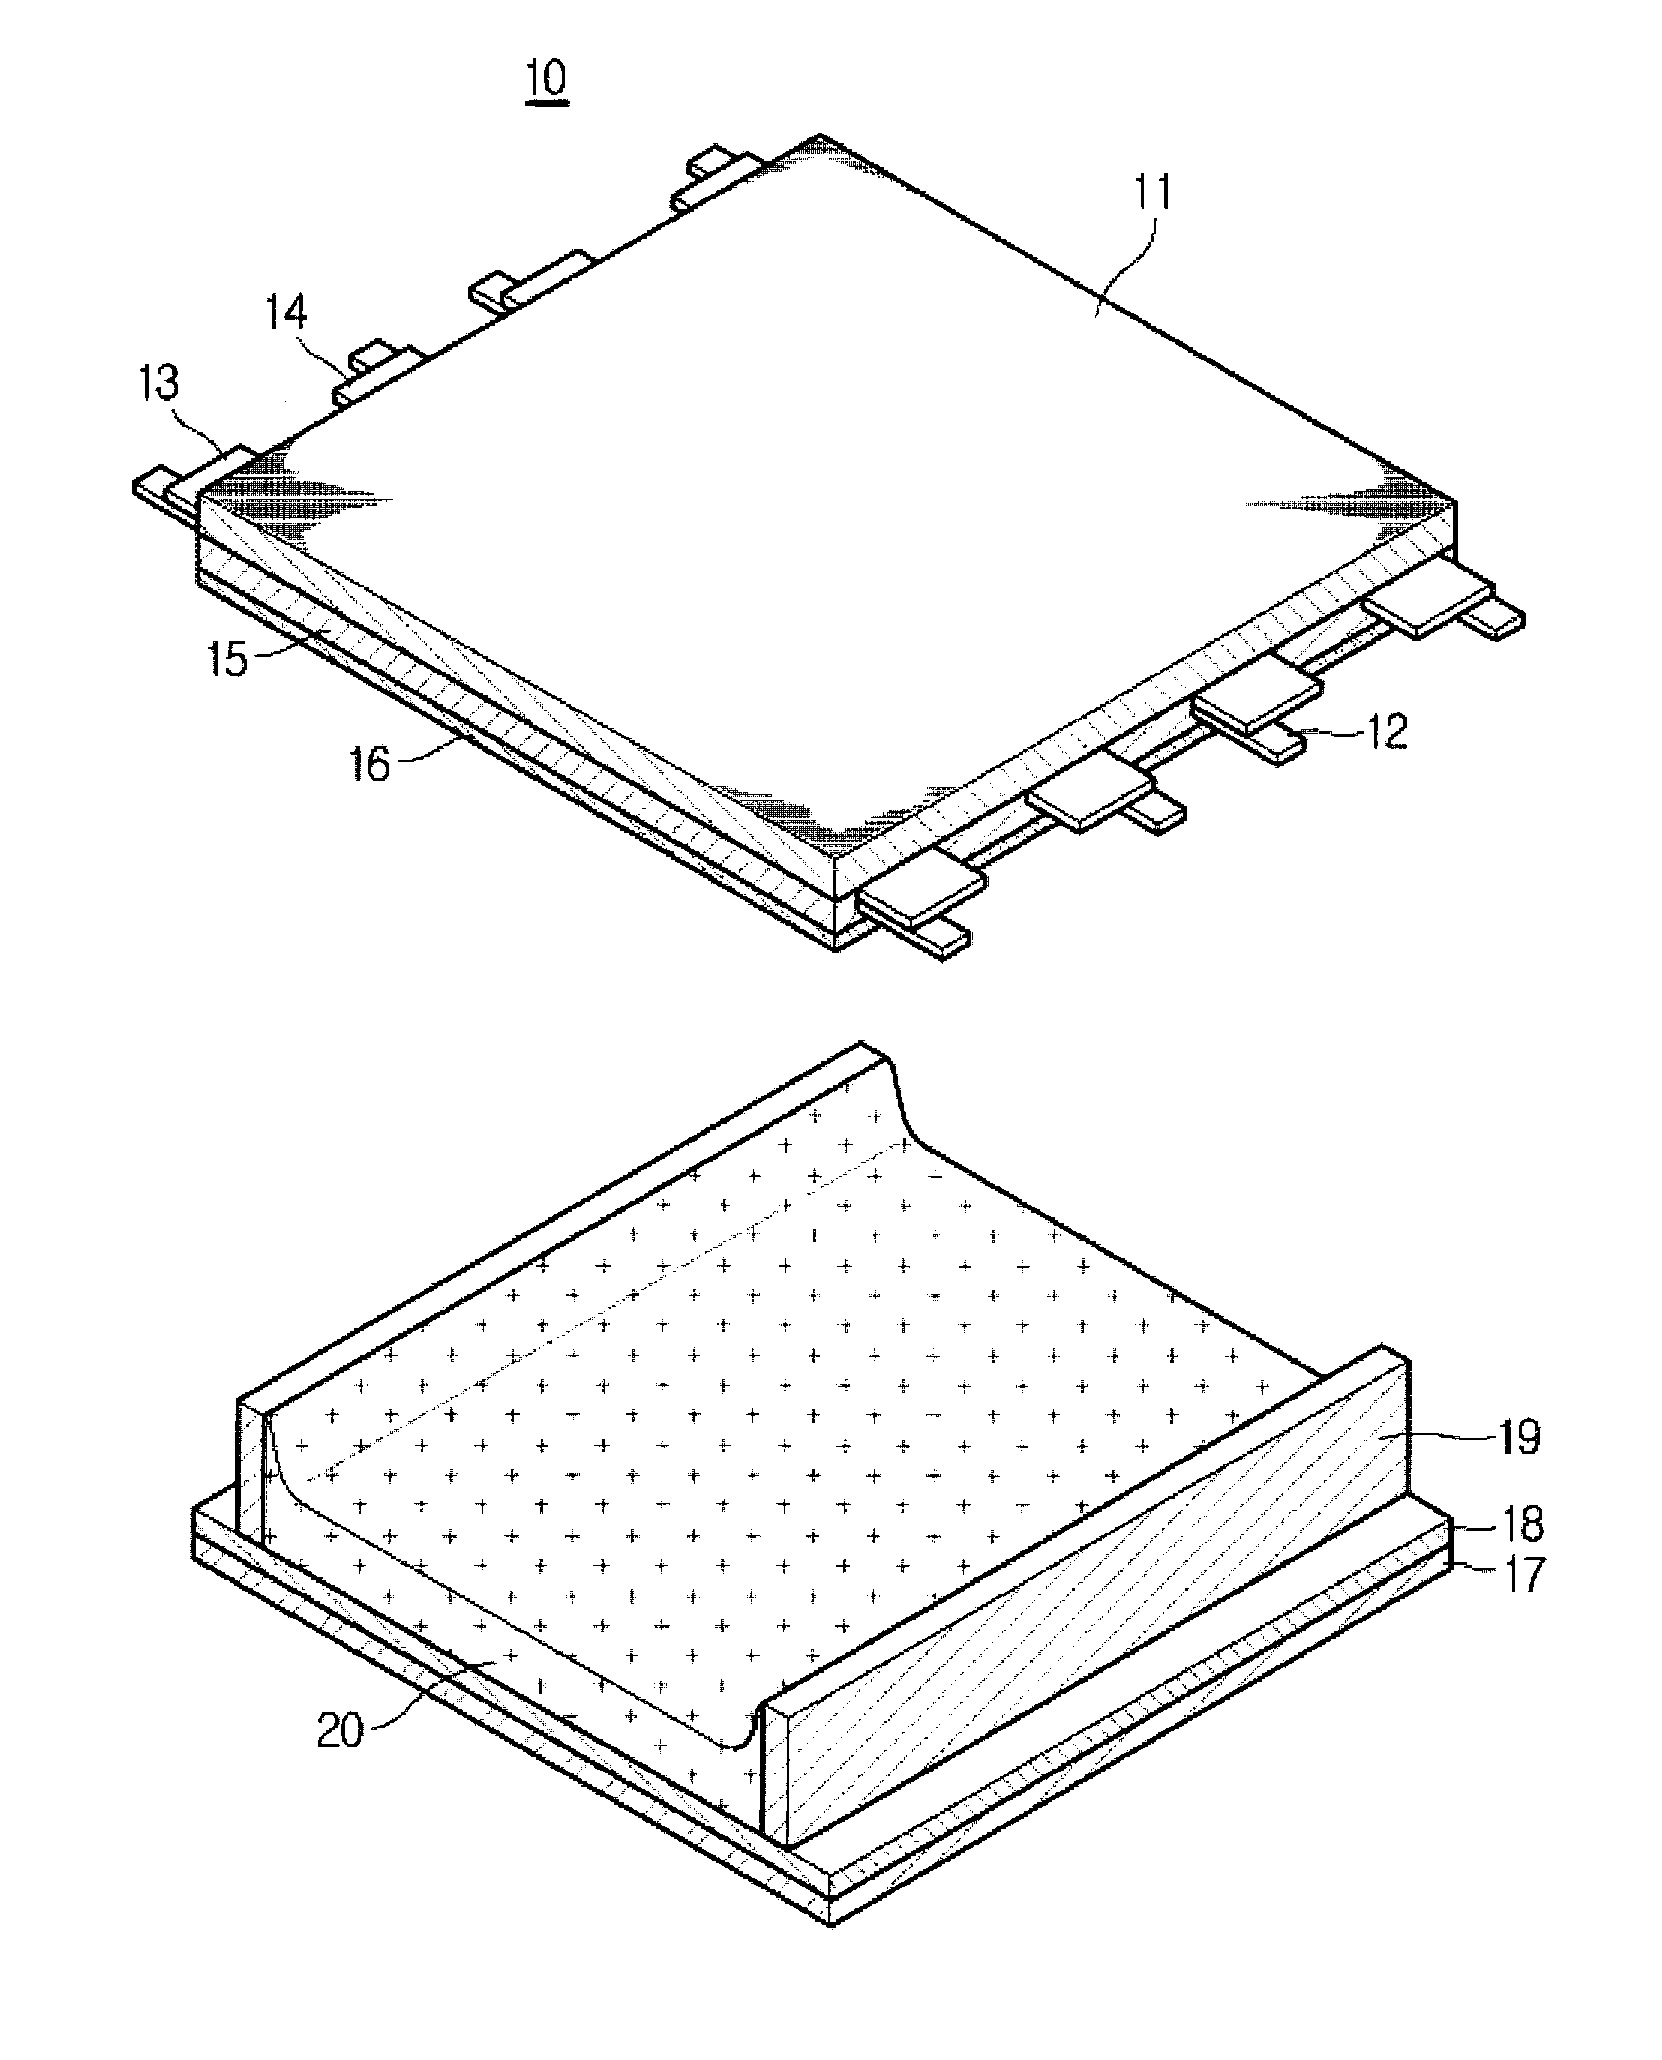 Ac-plasma display devices using metal nanoparticles or nanostructures and method for manufacturing the same